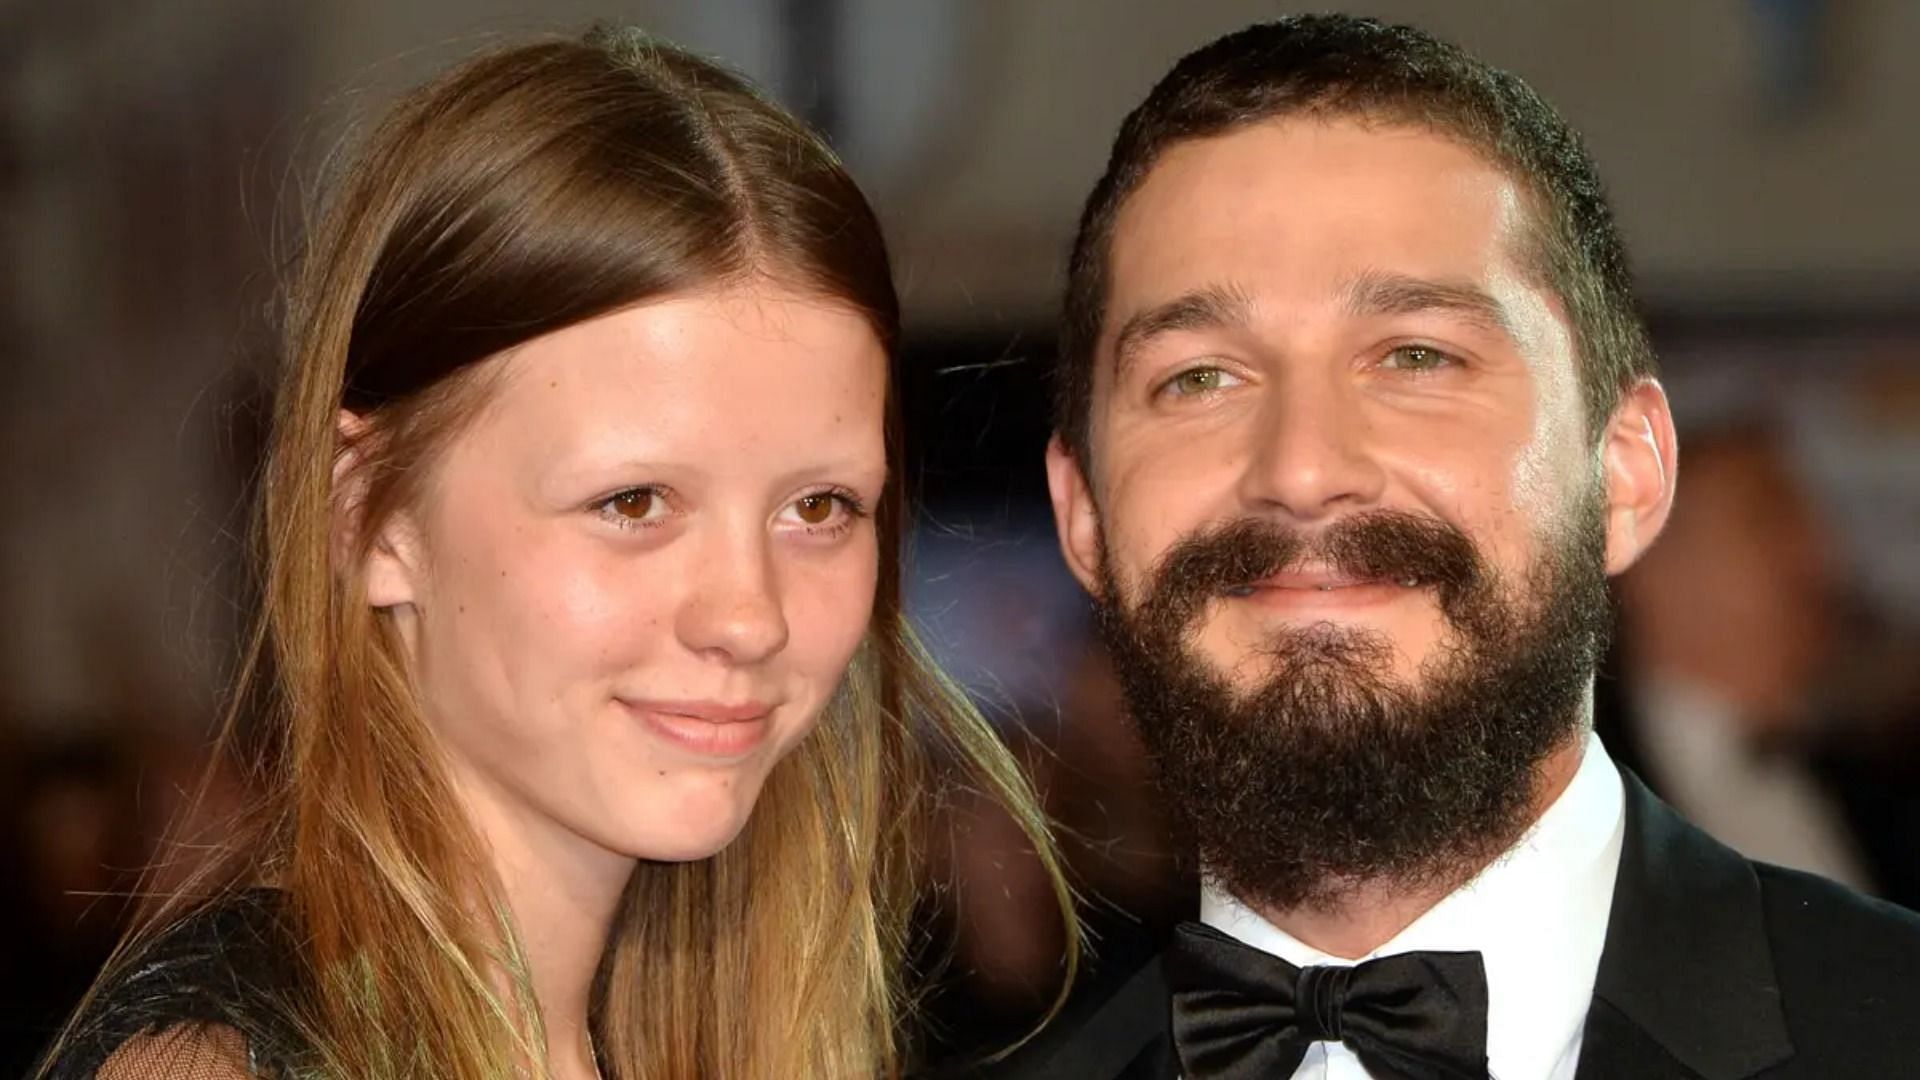 Shia LaBeouf and Mia Goth are yet to announce the birth of their first child (Image via Anthony Harvey/Getty Images)